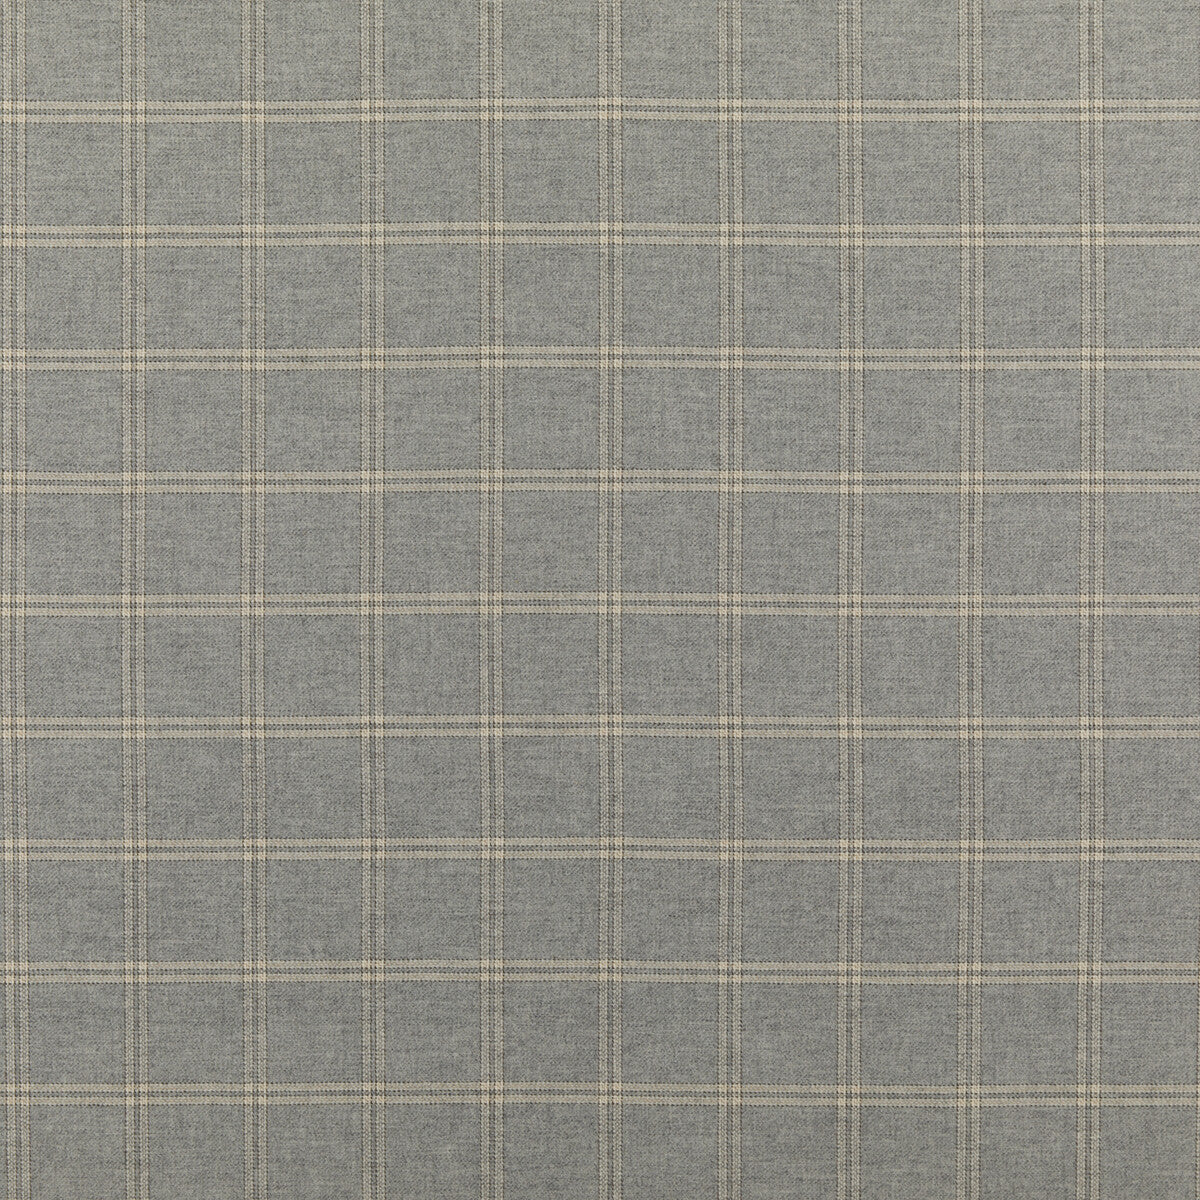 Walton fabric in shingle color - pattern FD775.A48.0 - by Mulberry in the Modern Country collection